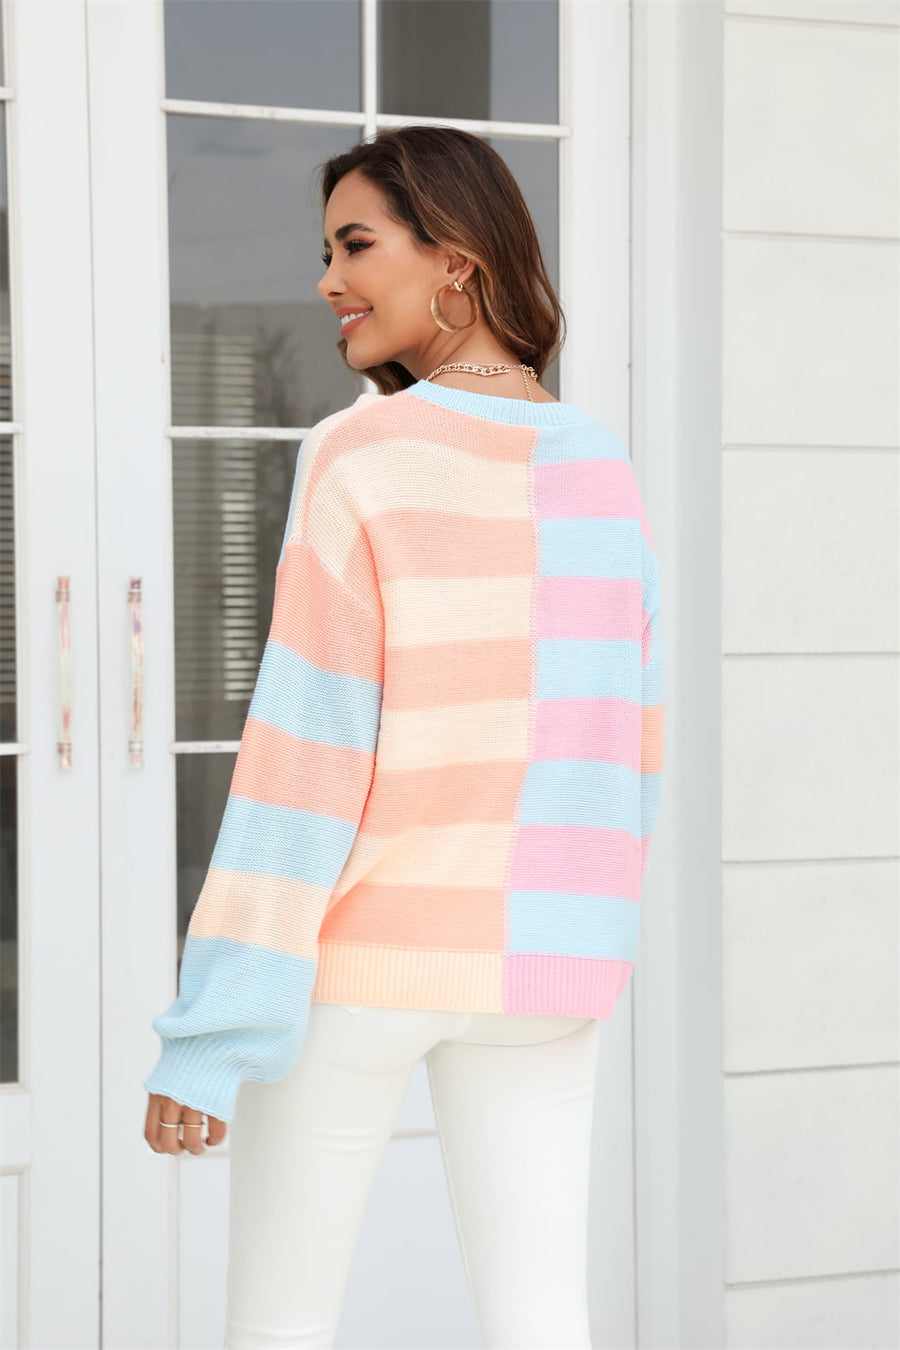 Read Between The Lines Sweater